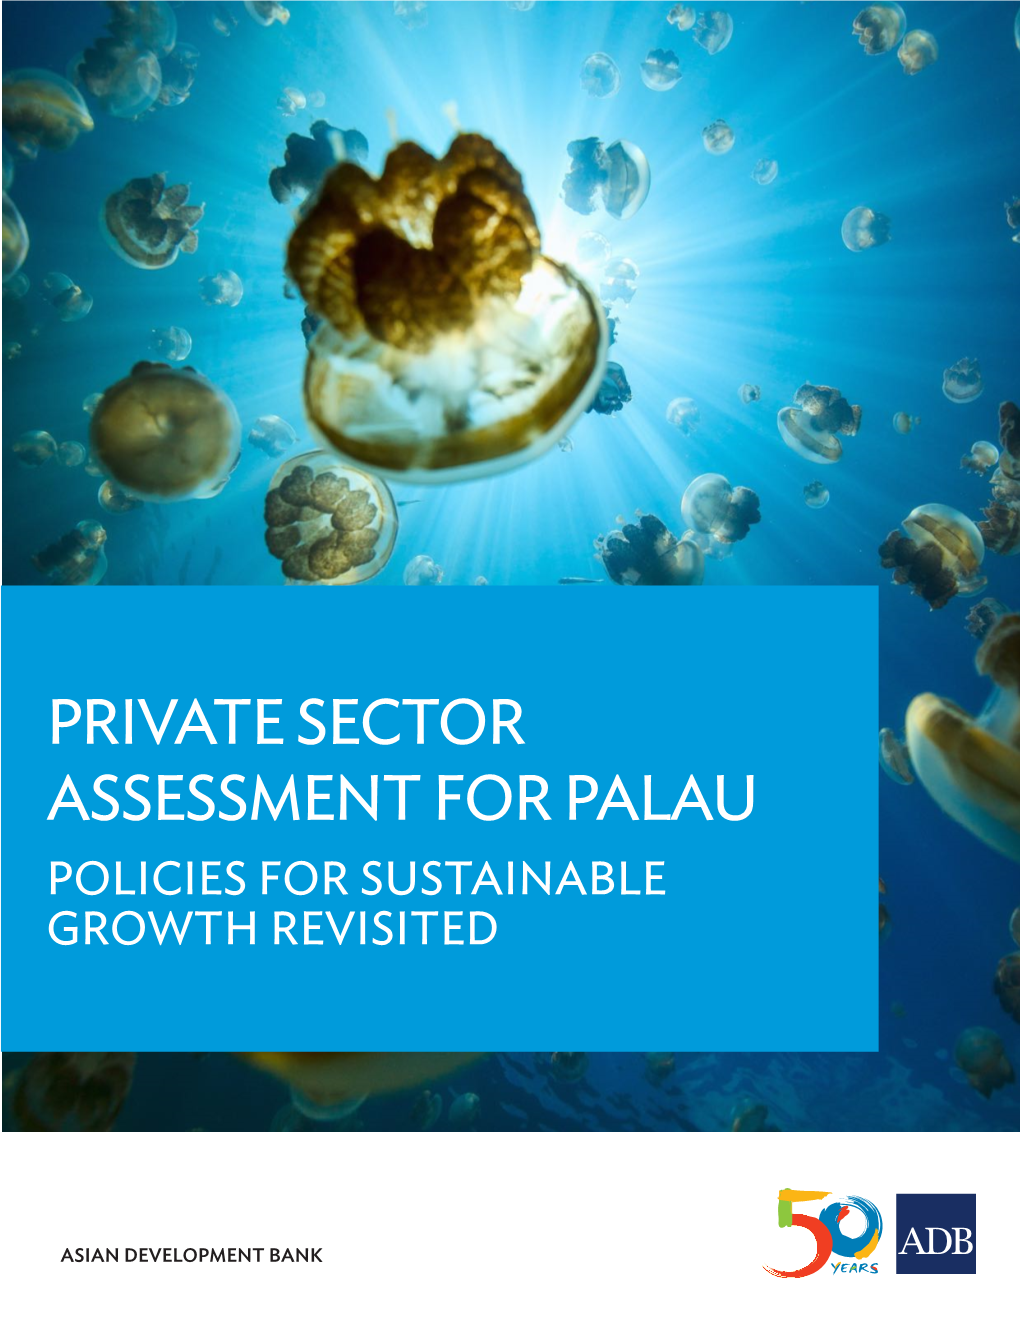 Private Sector Assessment for Palau: Policies for Sustainable Growth Revisited­­ Mandaluyong City, Philippines: Asian Development Bank, 2017